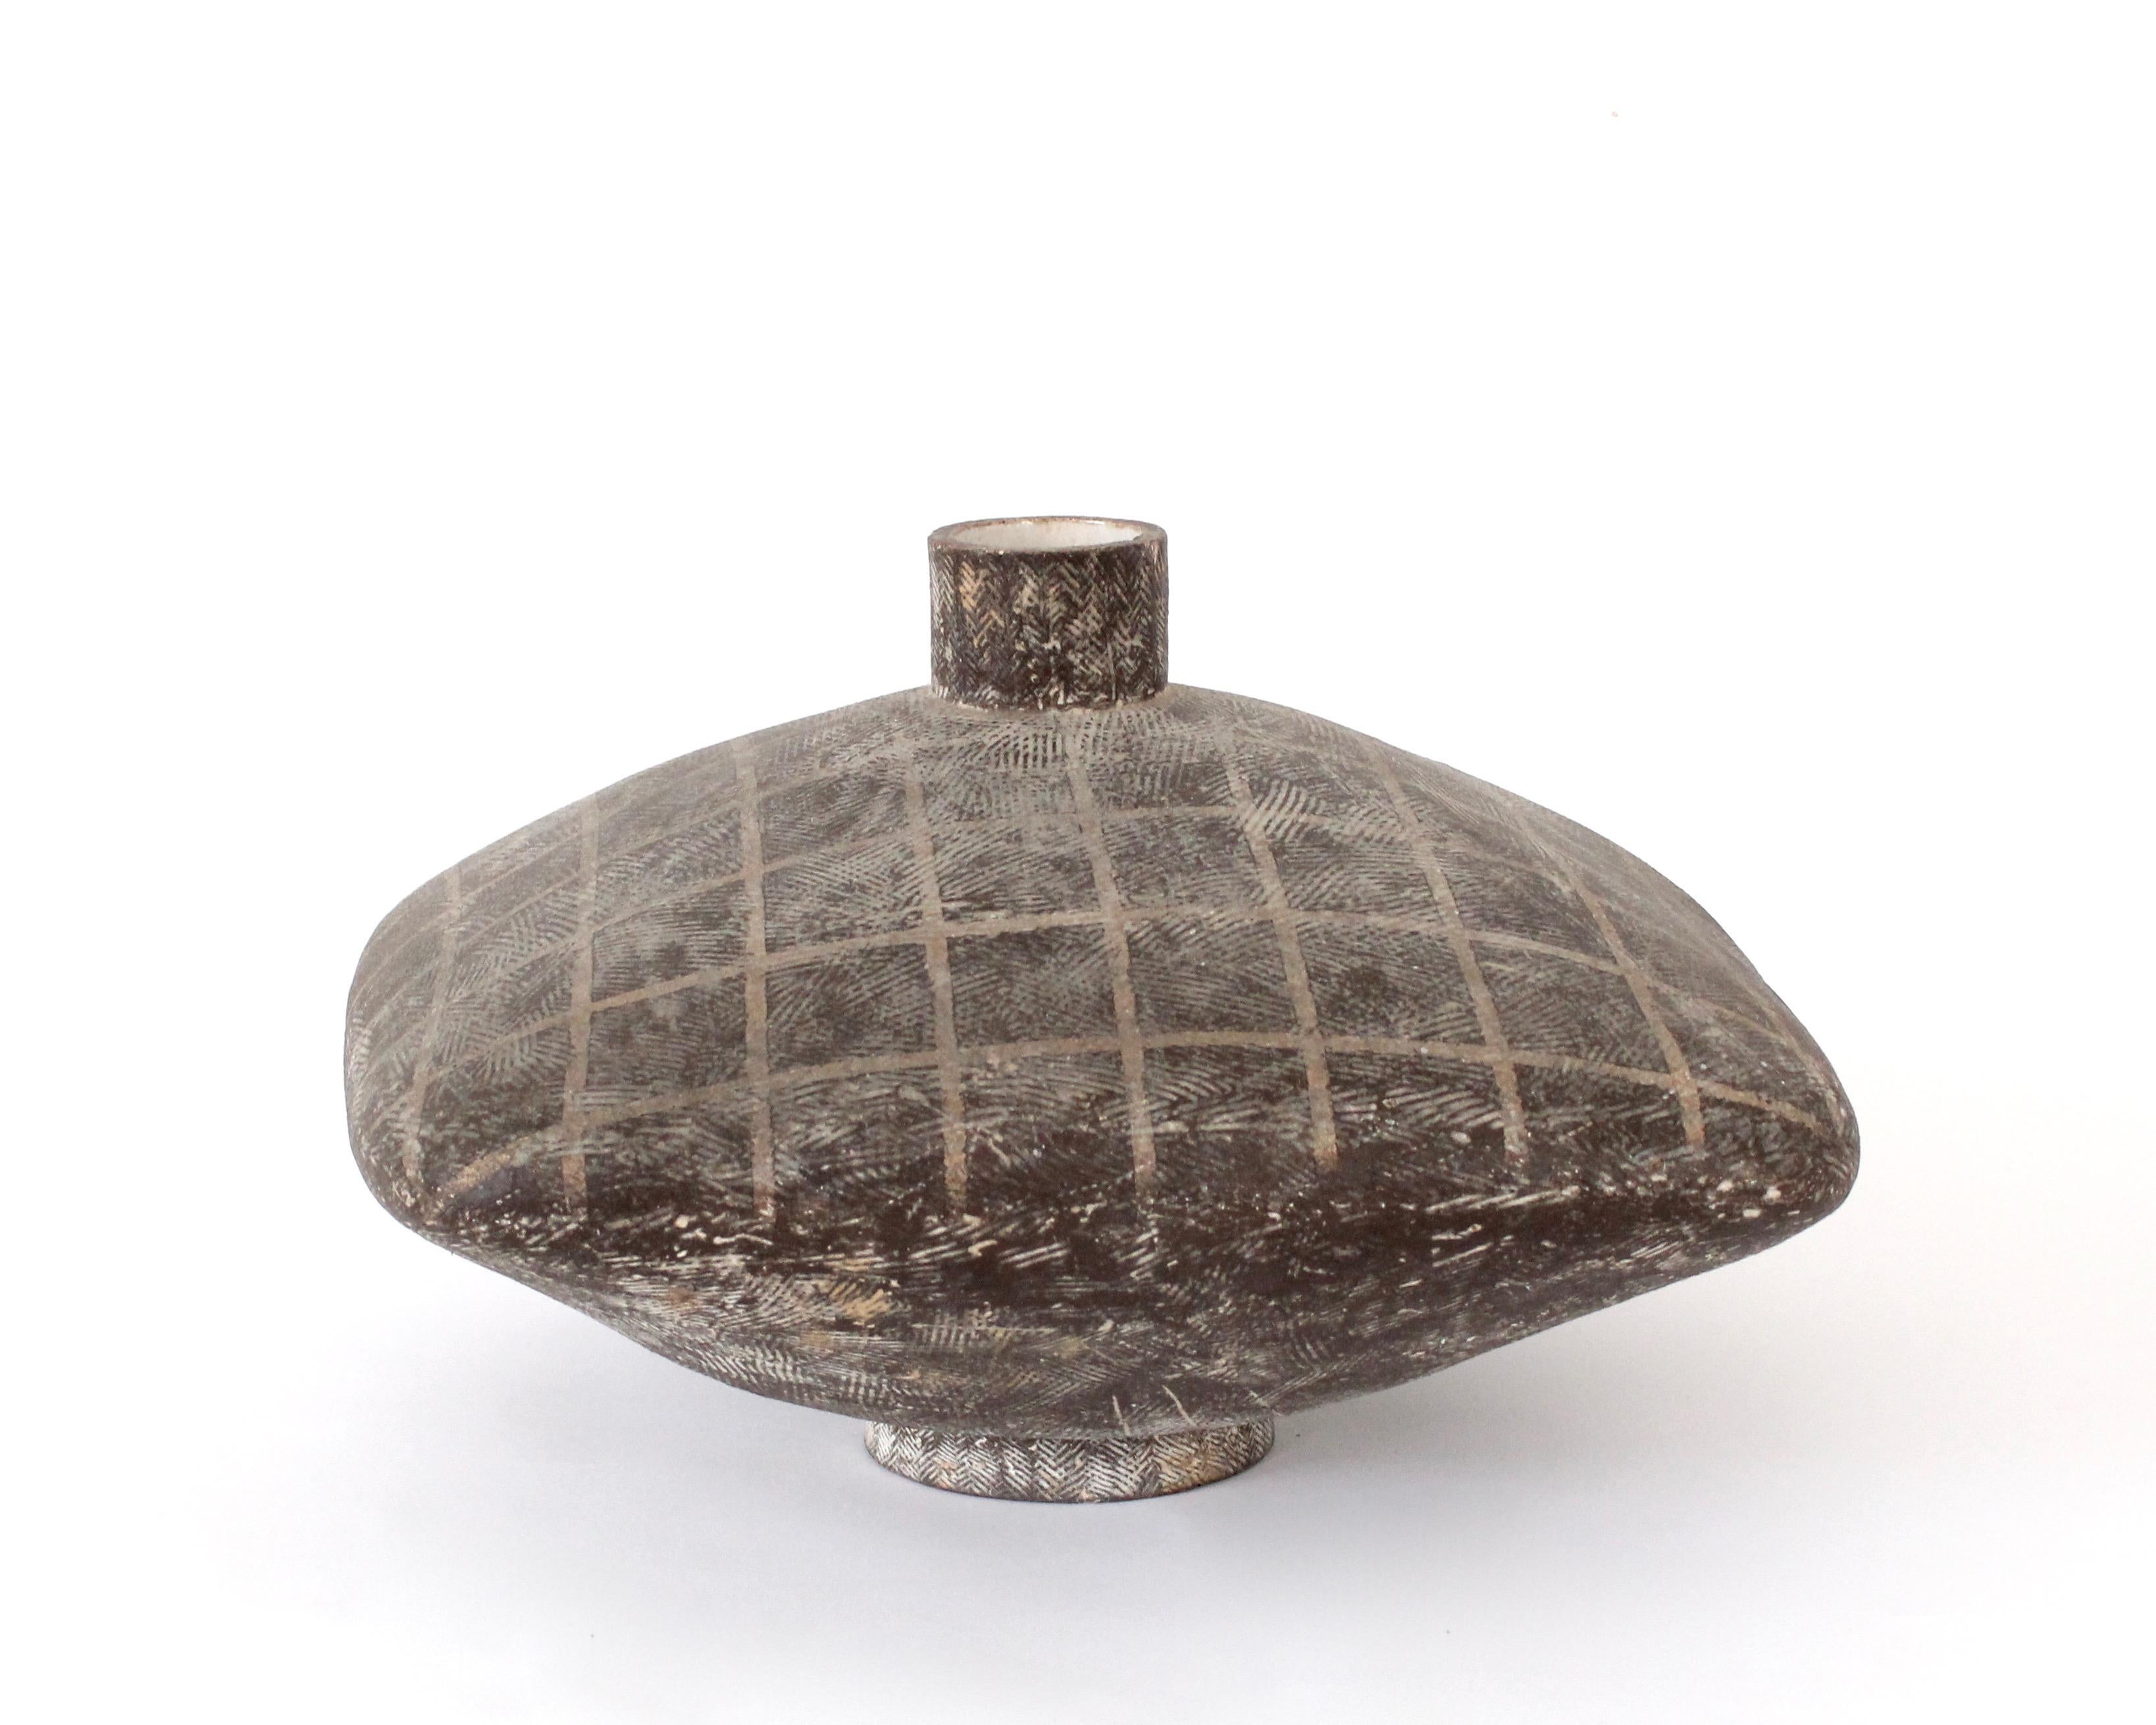 Claude Conover large pillow form ceramic vessel. 
This stoneware vase is glazed in two different tones and finely decorated with Conover's signature one iconic markings. Classic and contemporary in form, this bold and unique ceramic vessel has